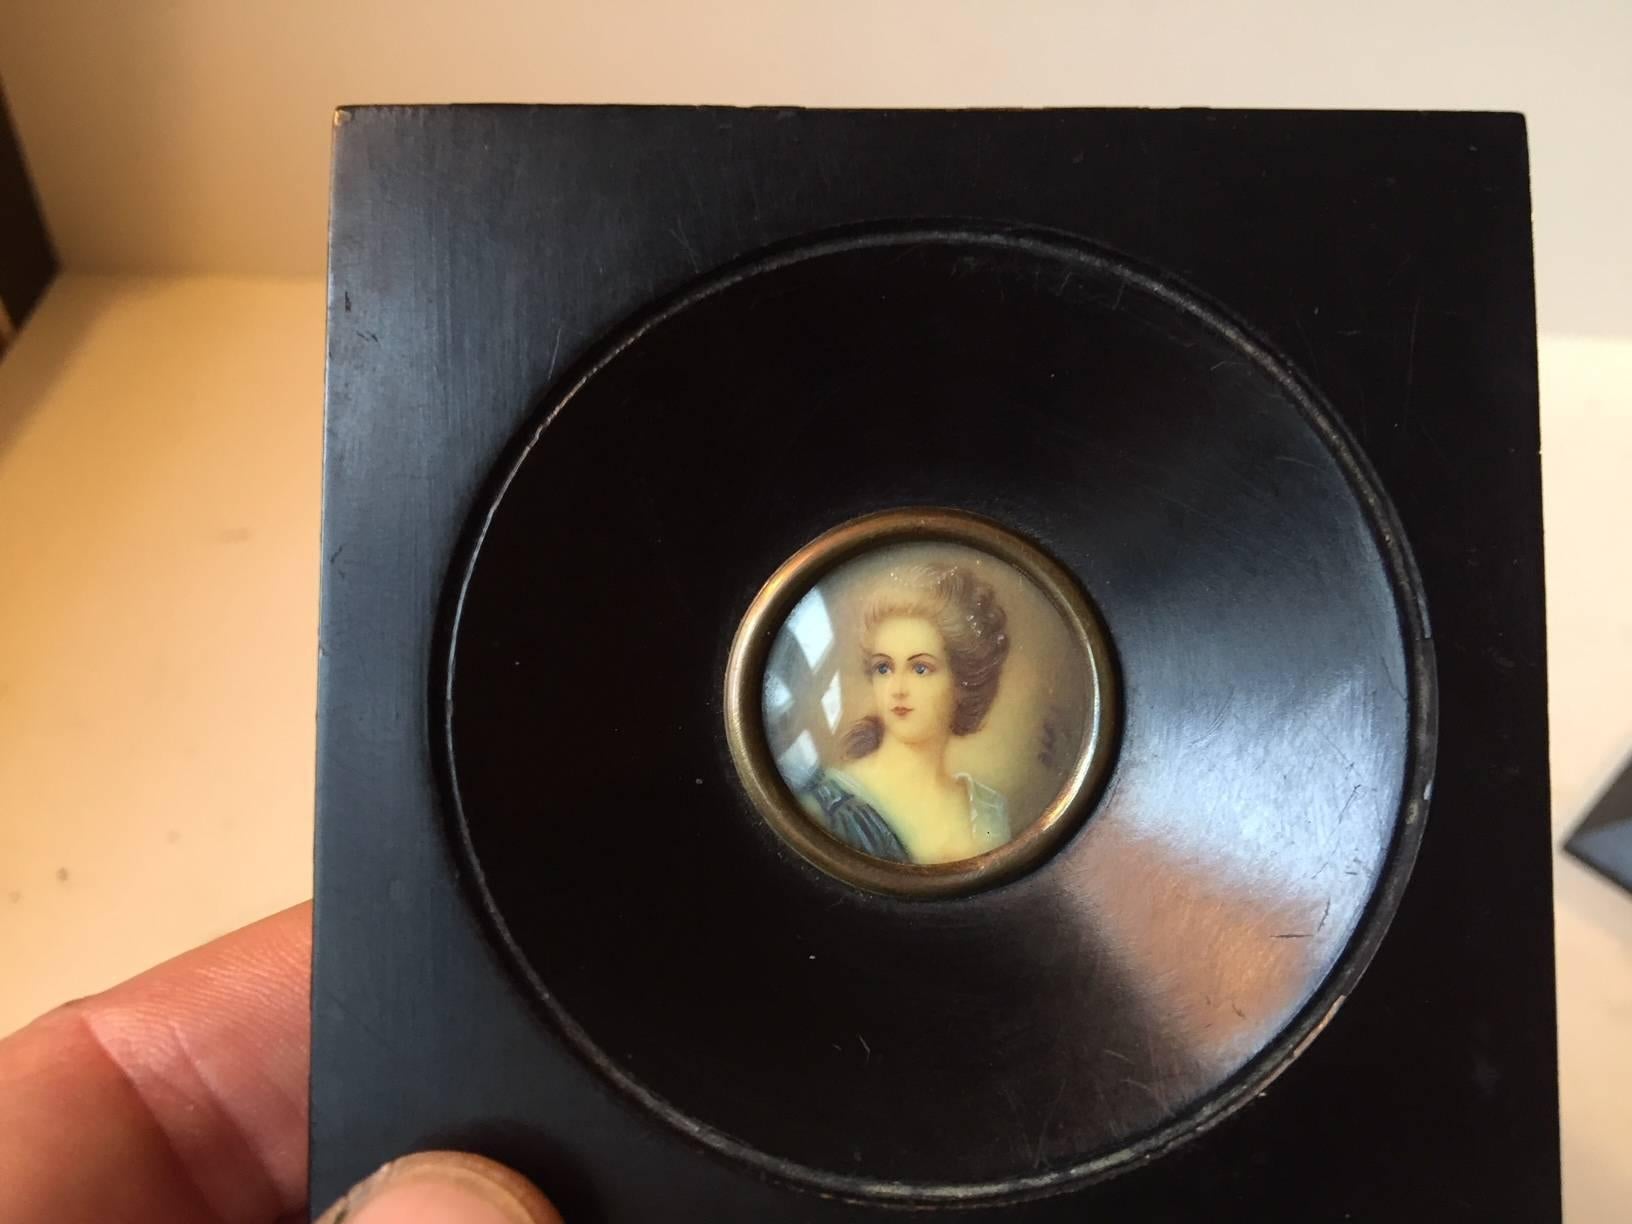 A pair of Italian miniature portraits with ebonized wooden frames. The portraits measures 1.2 inch in diameter. Purchased between 1940-1960 at Savarese Art Shop in Sorrento Italy. Both pieces are signed and the models names are present to the makers